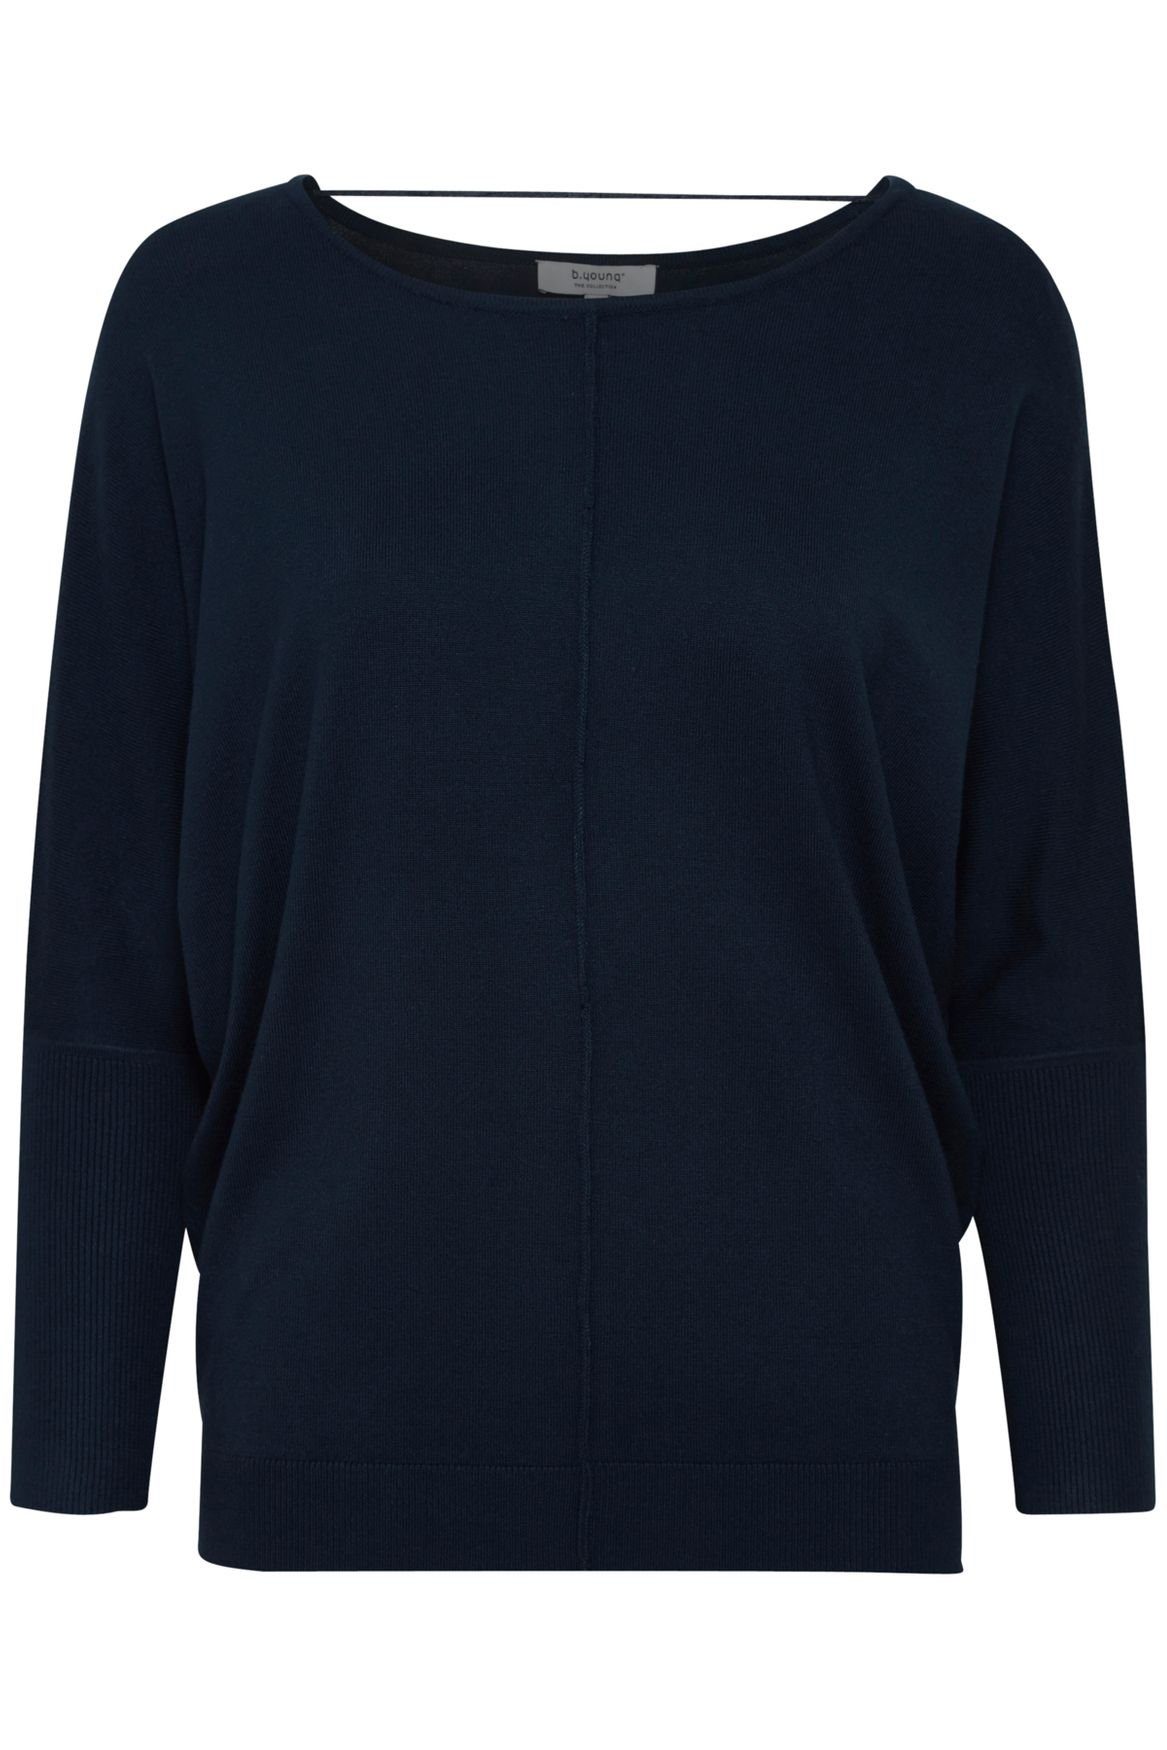 b.young Strickpullover Feinstrick Pullover Langarm Stretch Shirt BYPIMBA 5155 in Dunkelblau